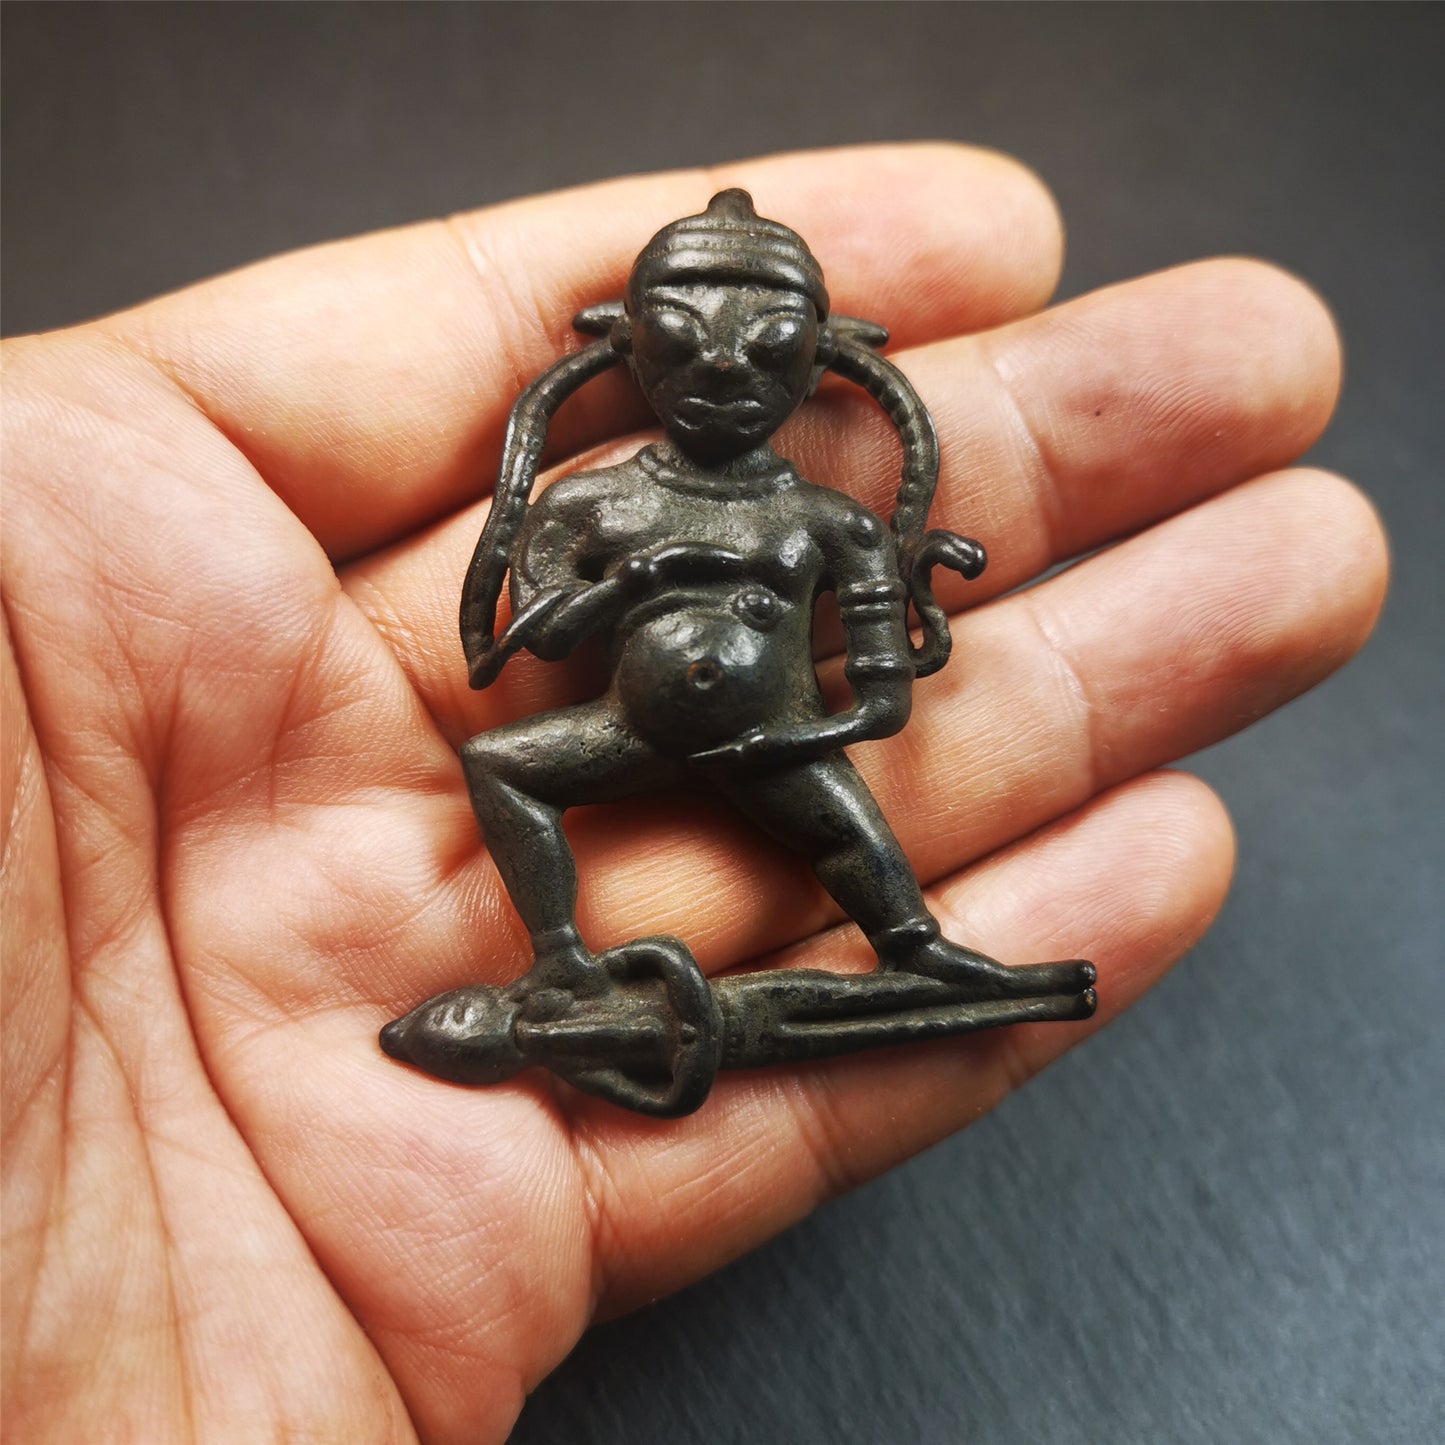 This Black Jambhala(Dzambhala) statue was collected from Goinqên goinba Monastery,Dege Tibet,about 40 years old. It is handmade of thokcha,black color,2.17 inches height and 1.38 inches width. He is the God of Wealth in Tibetan Buddhism. 